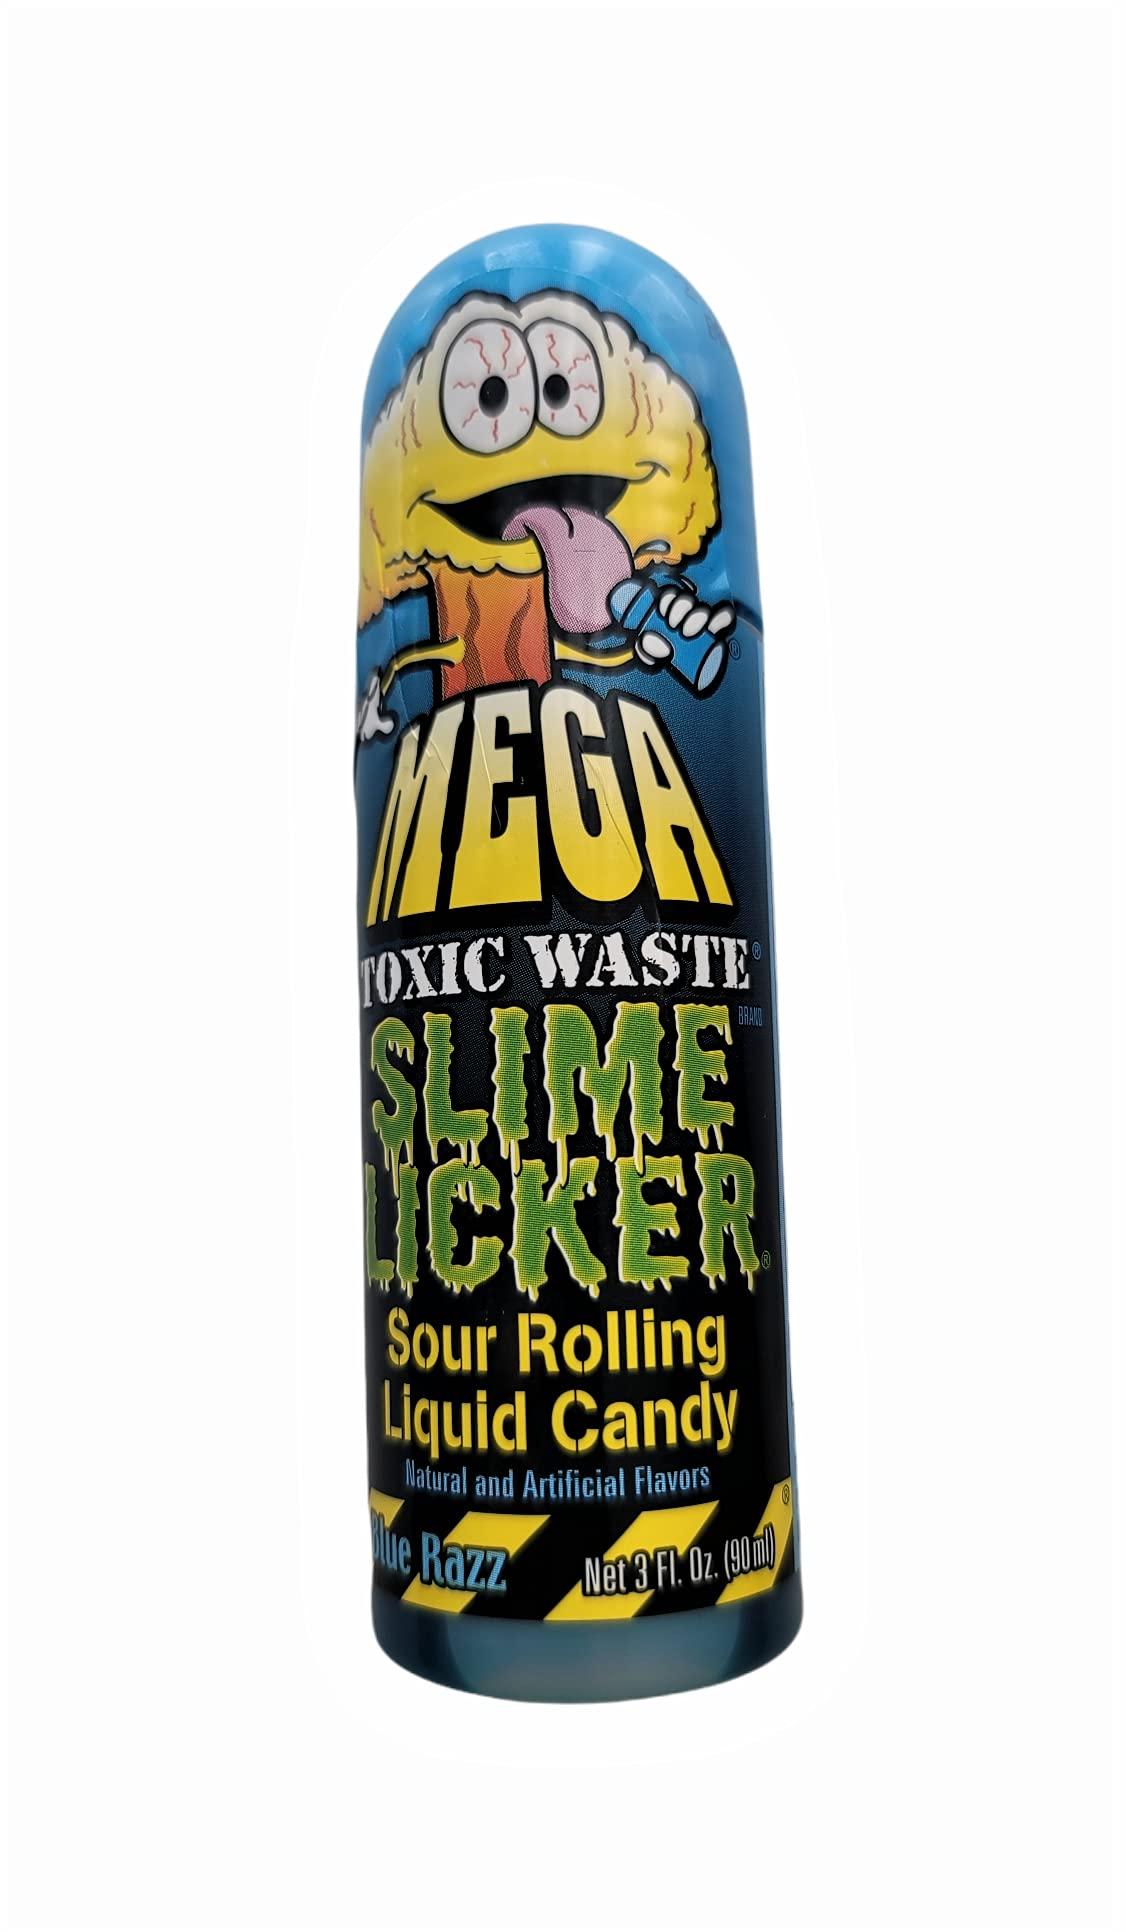 Slime Licker MEGA Size - 3-Pack of Sour Rolling Liquid Candy - ONE